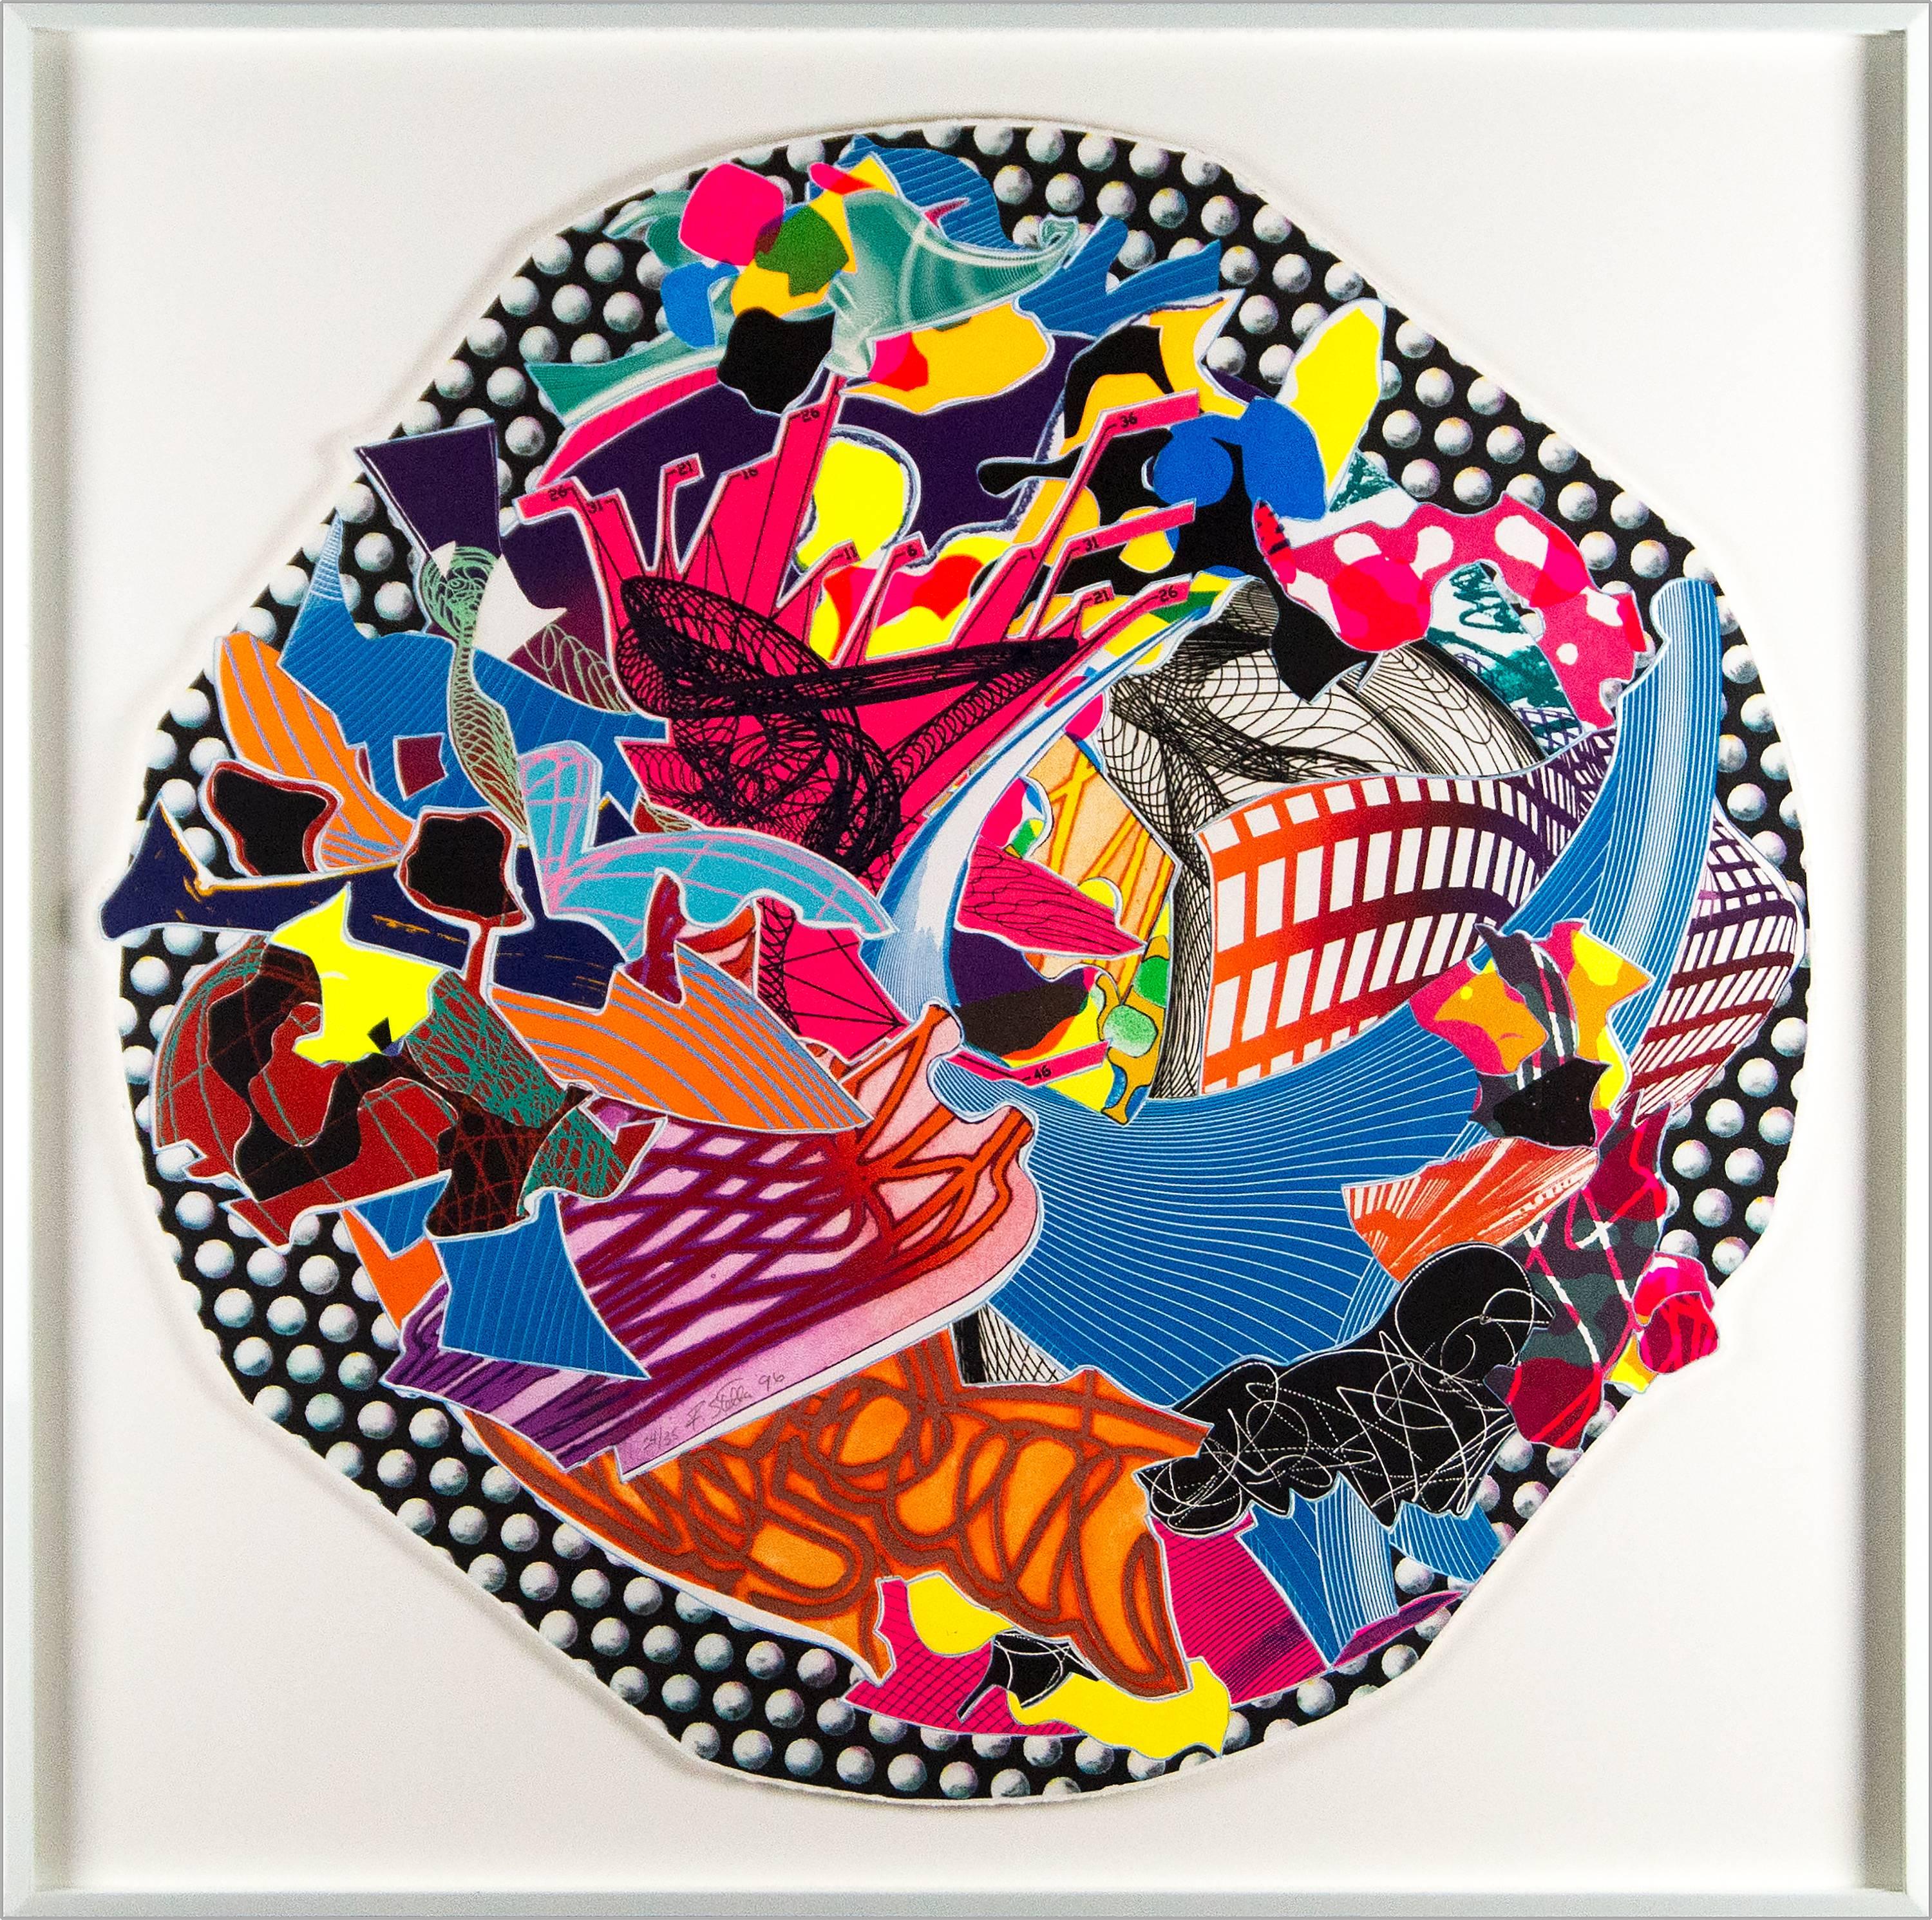 Fattipuff, from Imaginary Places II - Print by Frank Stella